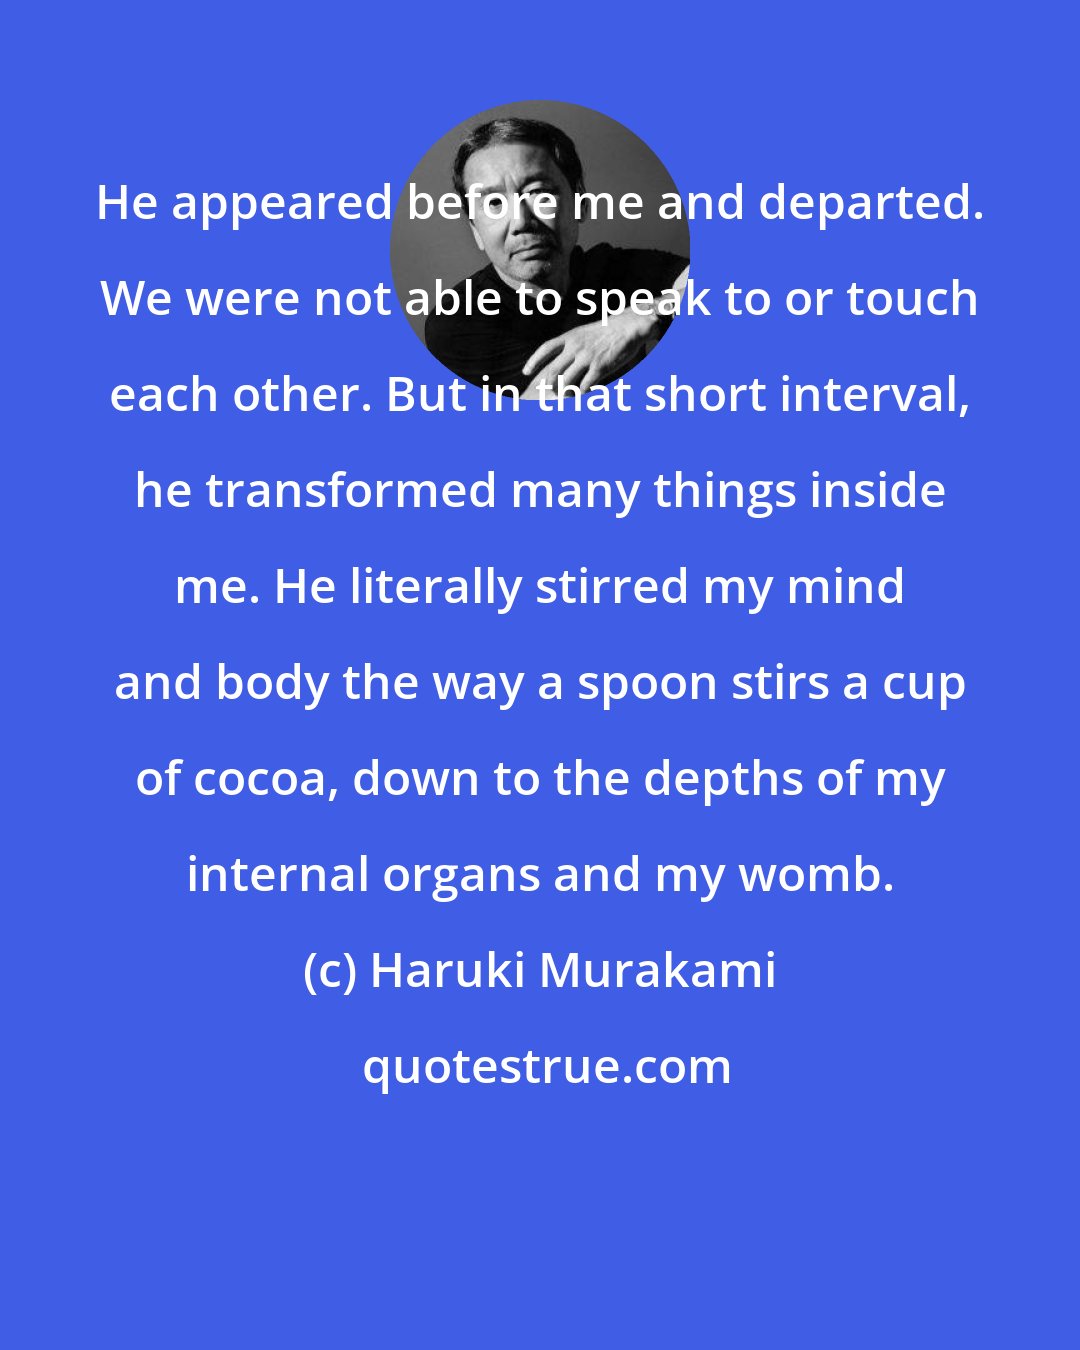 Haruki Murakami: He appeared before me and departed. We were not able to speak to or touch each other. But in that short interval, he transformed many things inside me. He literally stirred my mind and body the way a spoon stirs a cup of cocoa, down to the depths of my internal organs and my womb.